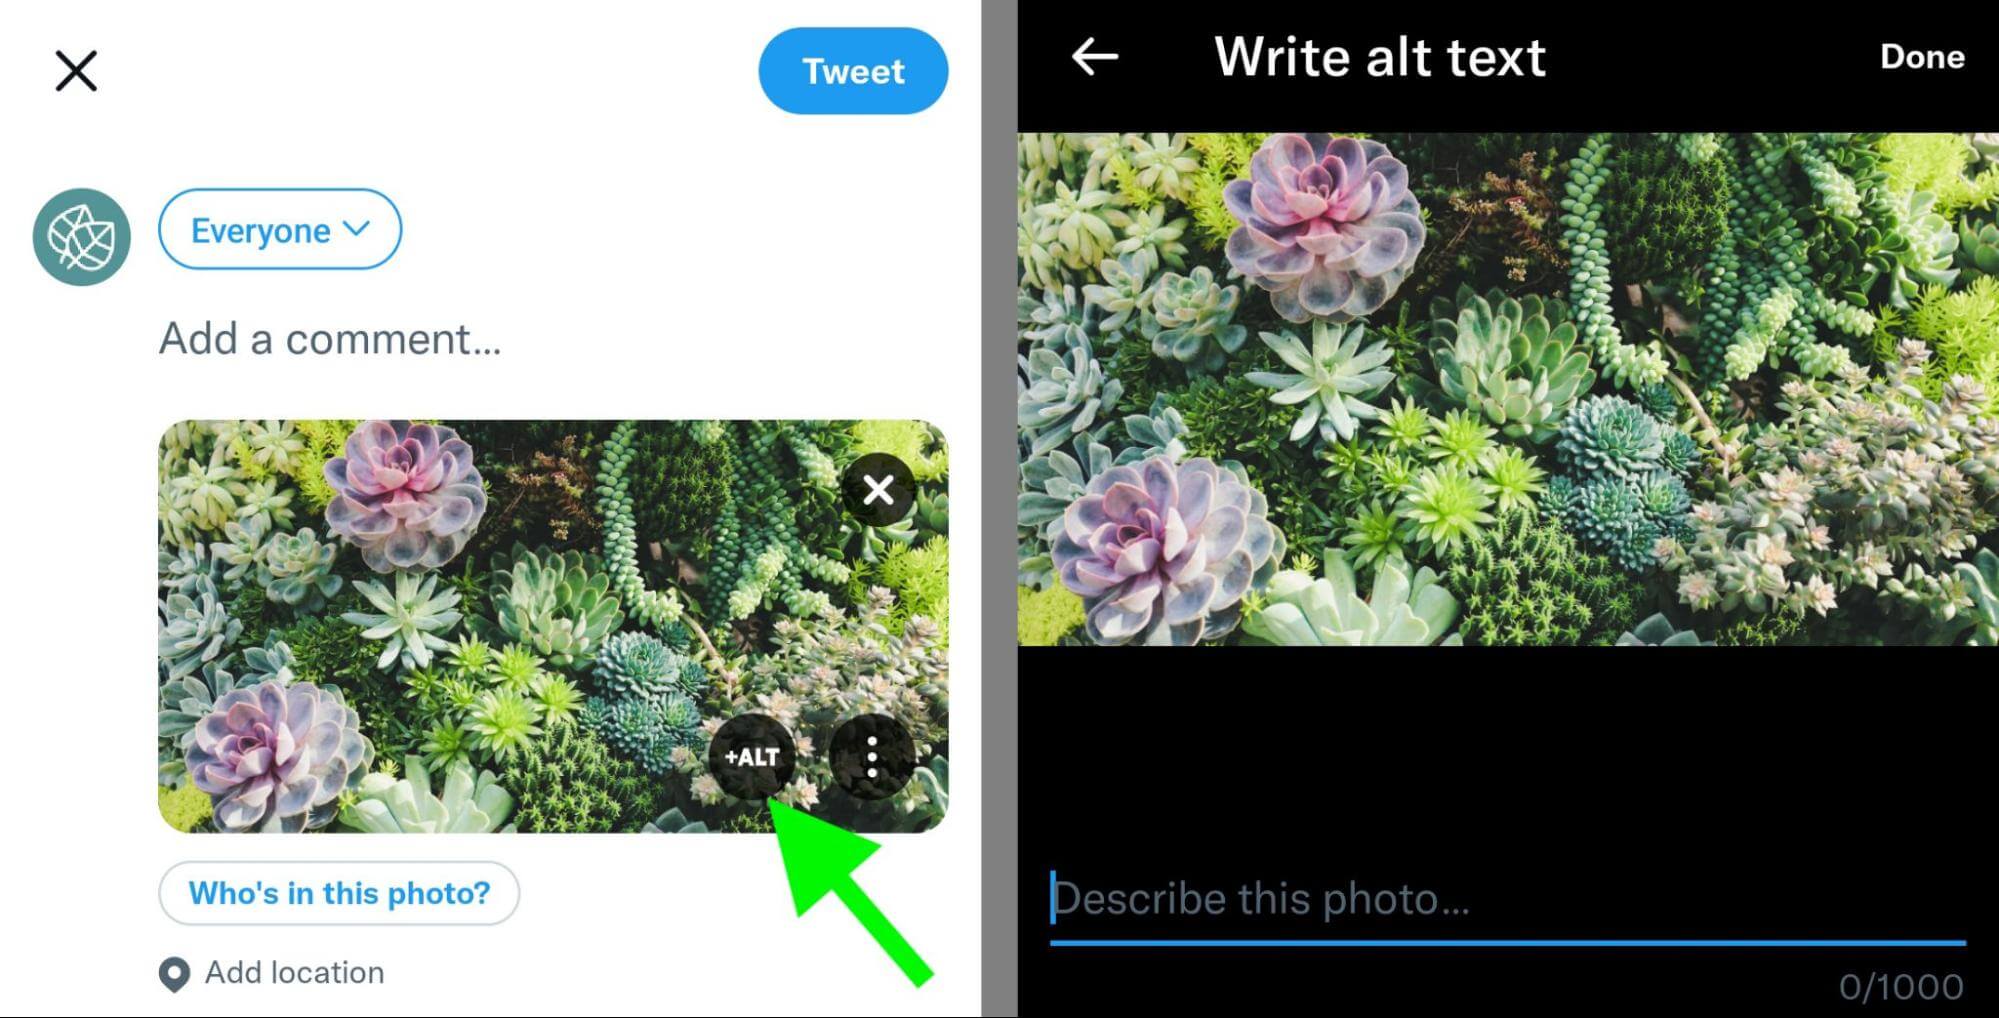 how-to-optimize-social-media-images-search-twitter-alt-text-example-24